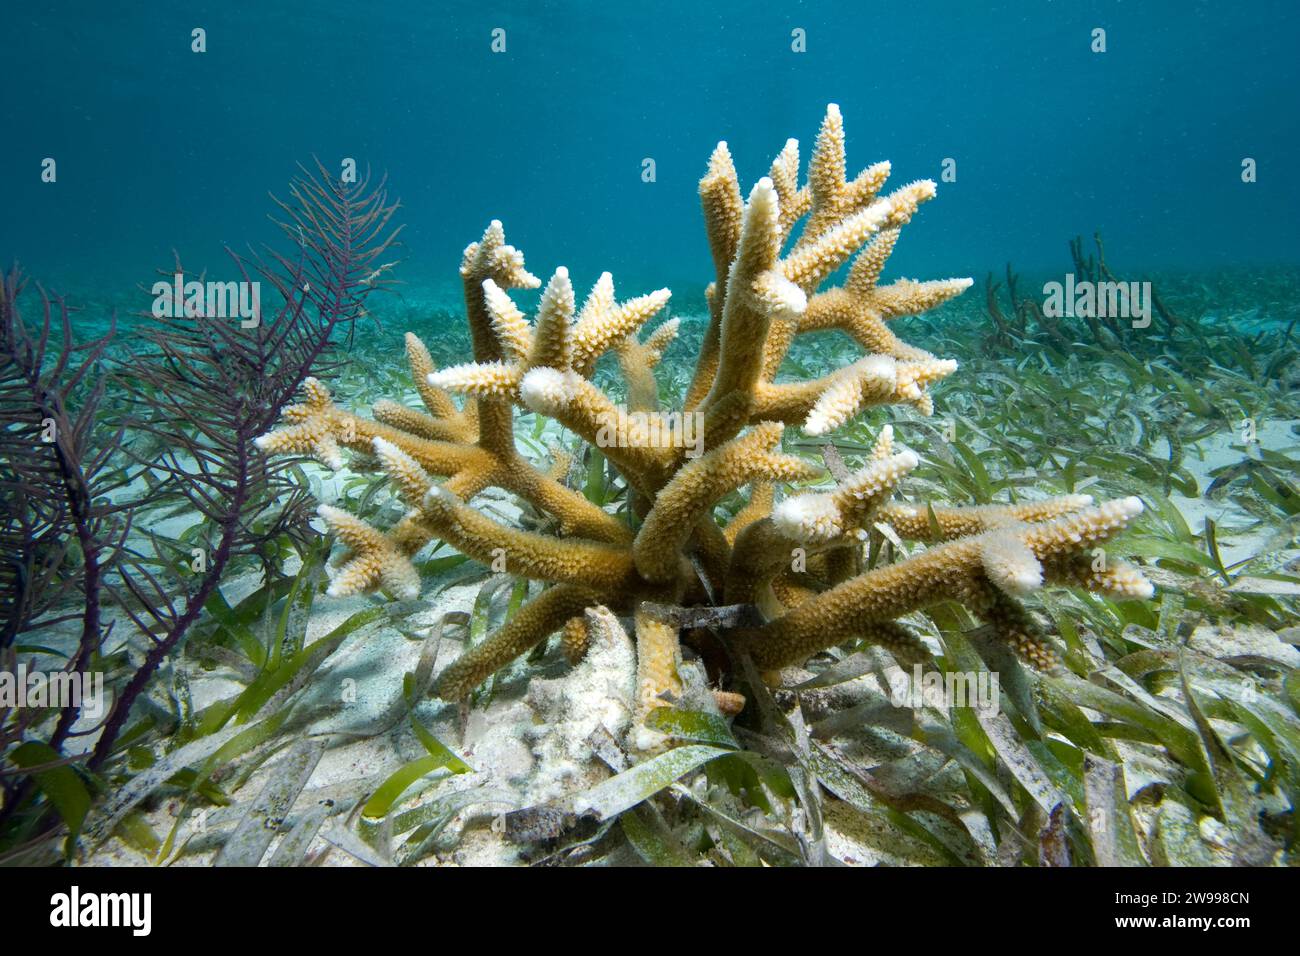 Staghorn coral, Acropora cervicornis,a Critically Endangered species,growning in a bed of Turtle Grass, Florida Keys National Marine Sanctuary, Florid Stock Photo